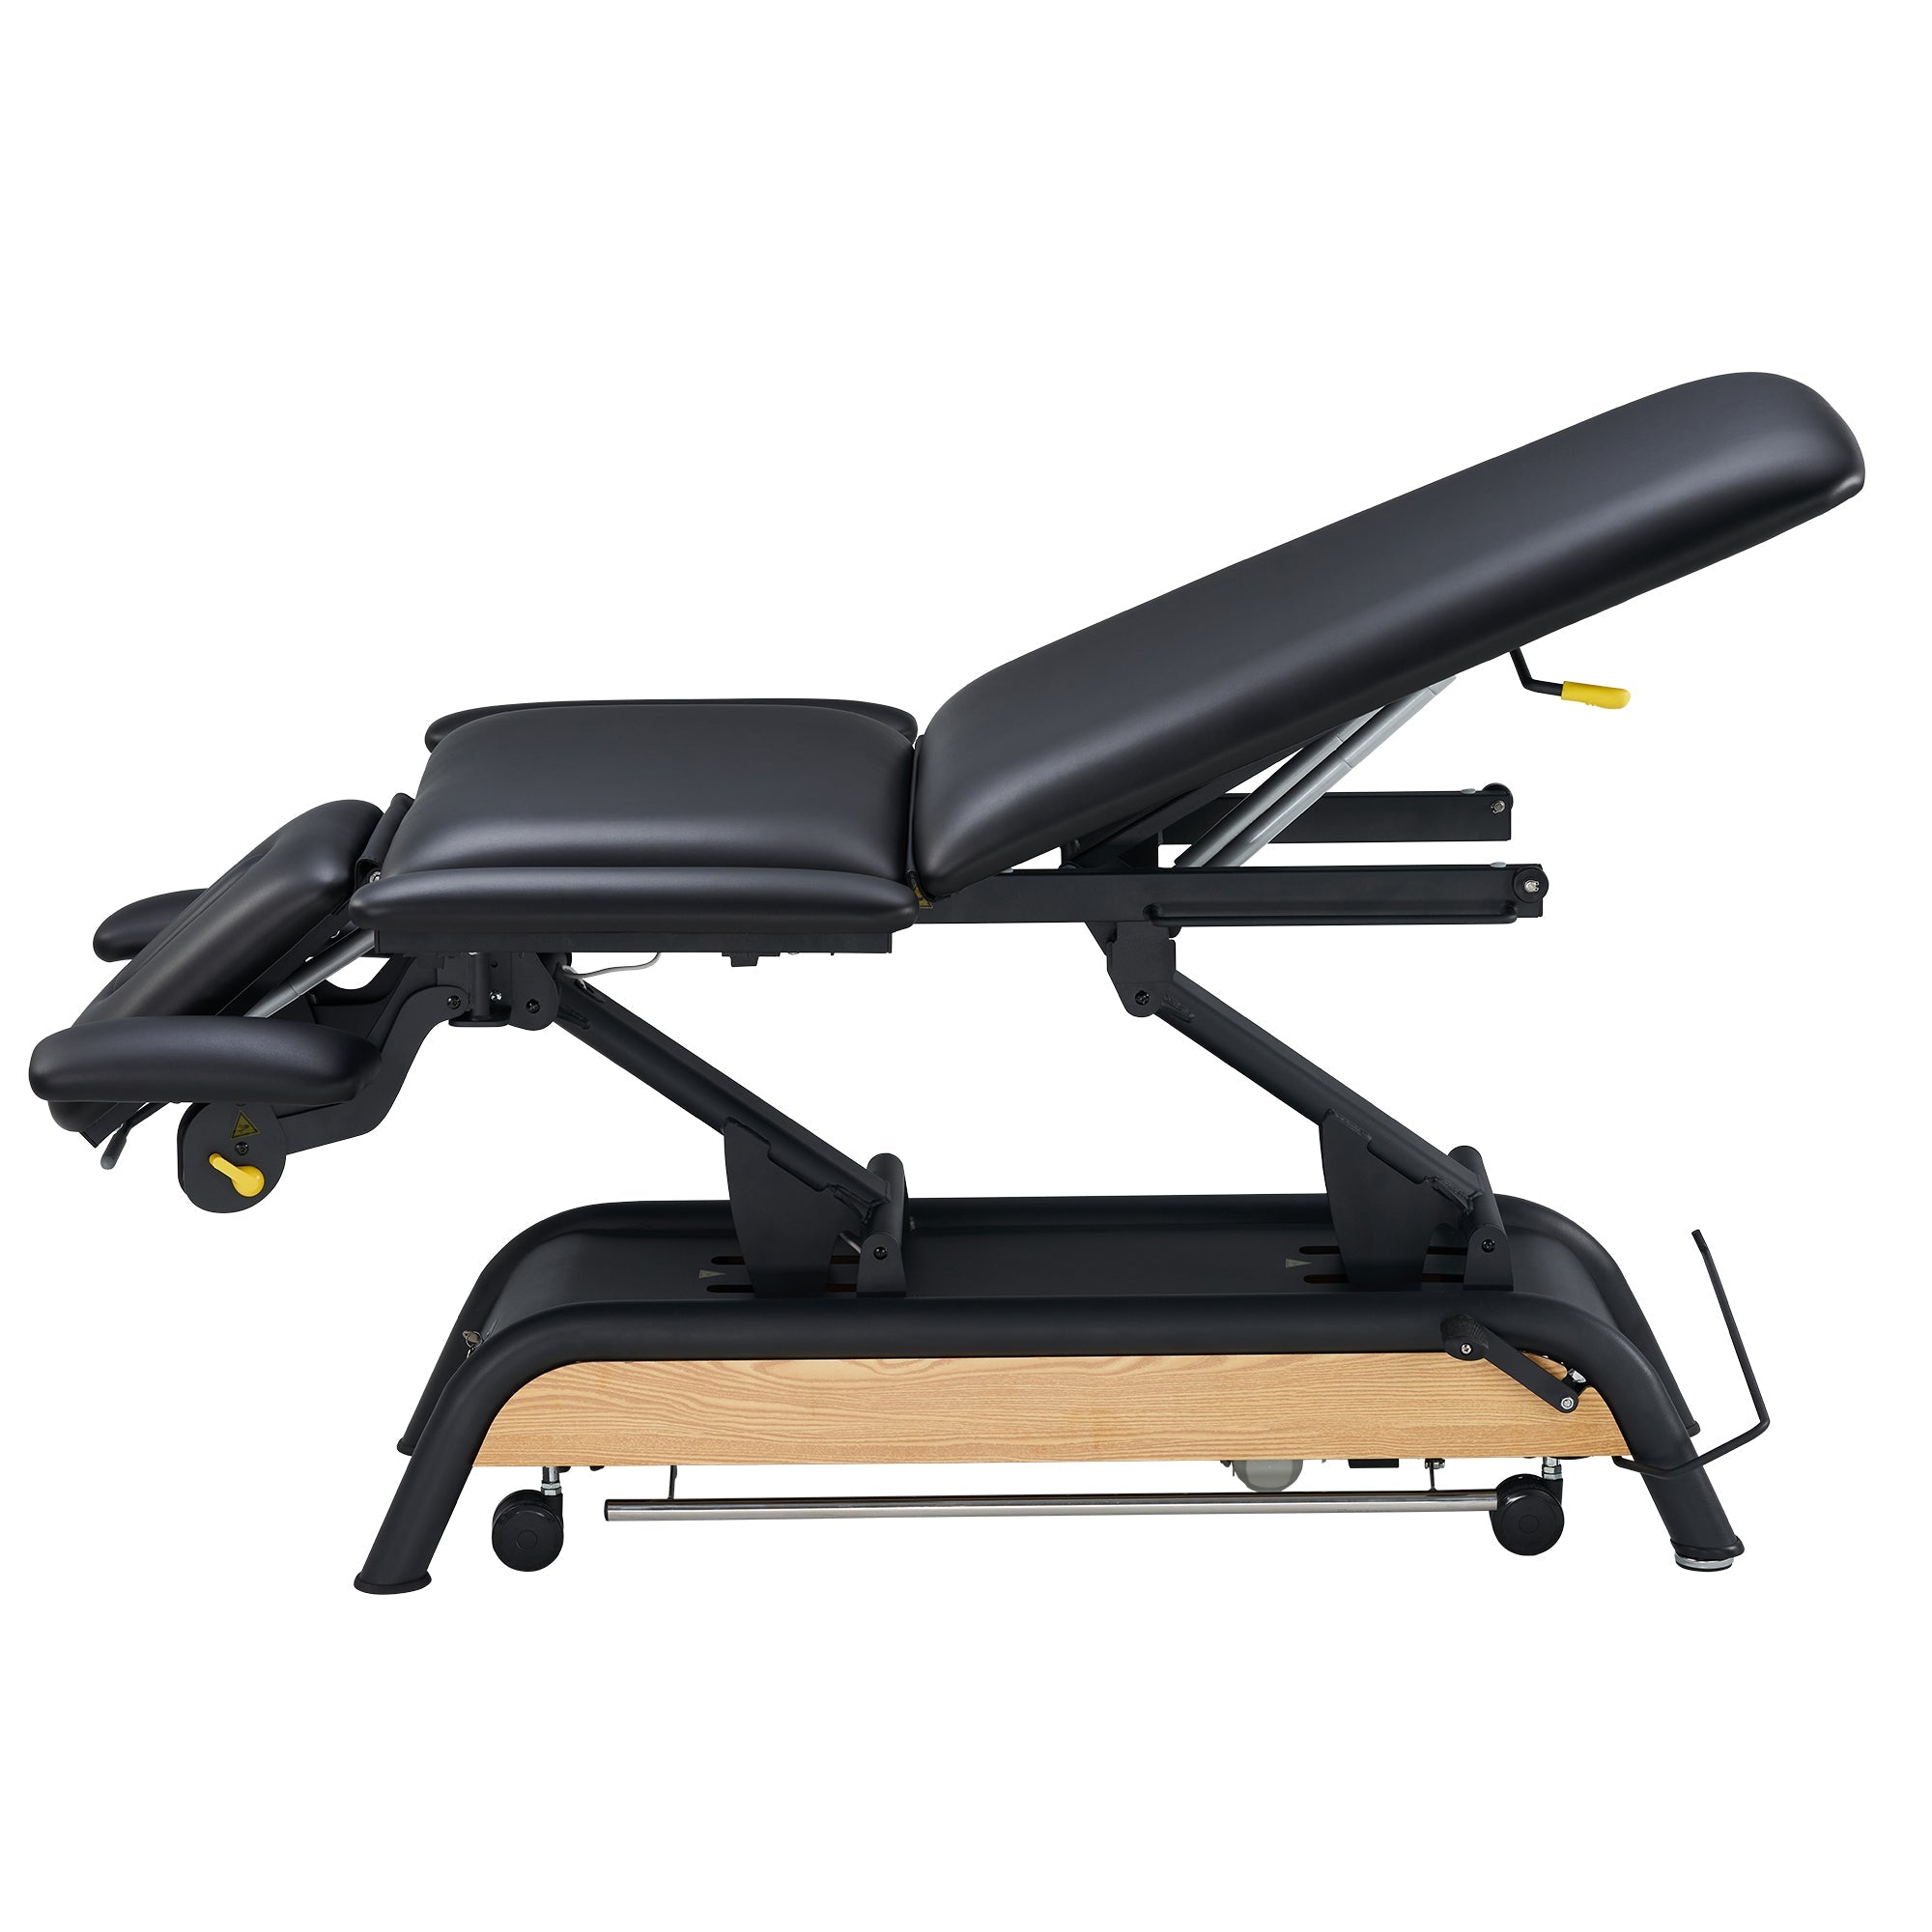 MediSports 5 Section Electric Treatment Table (Black)